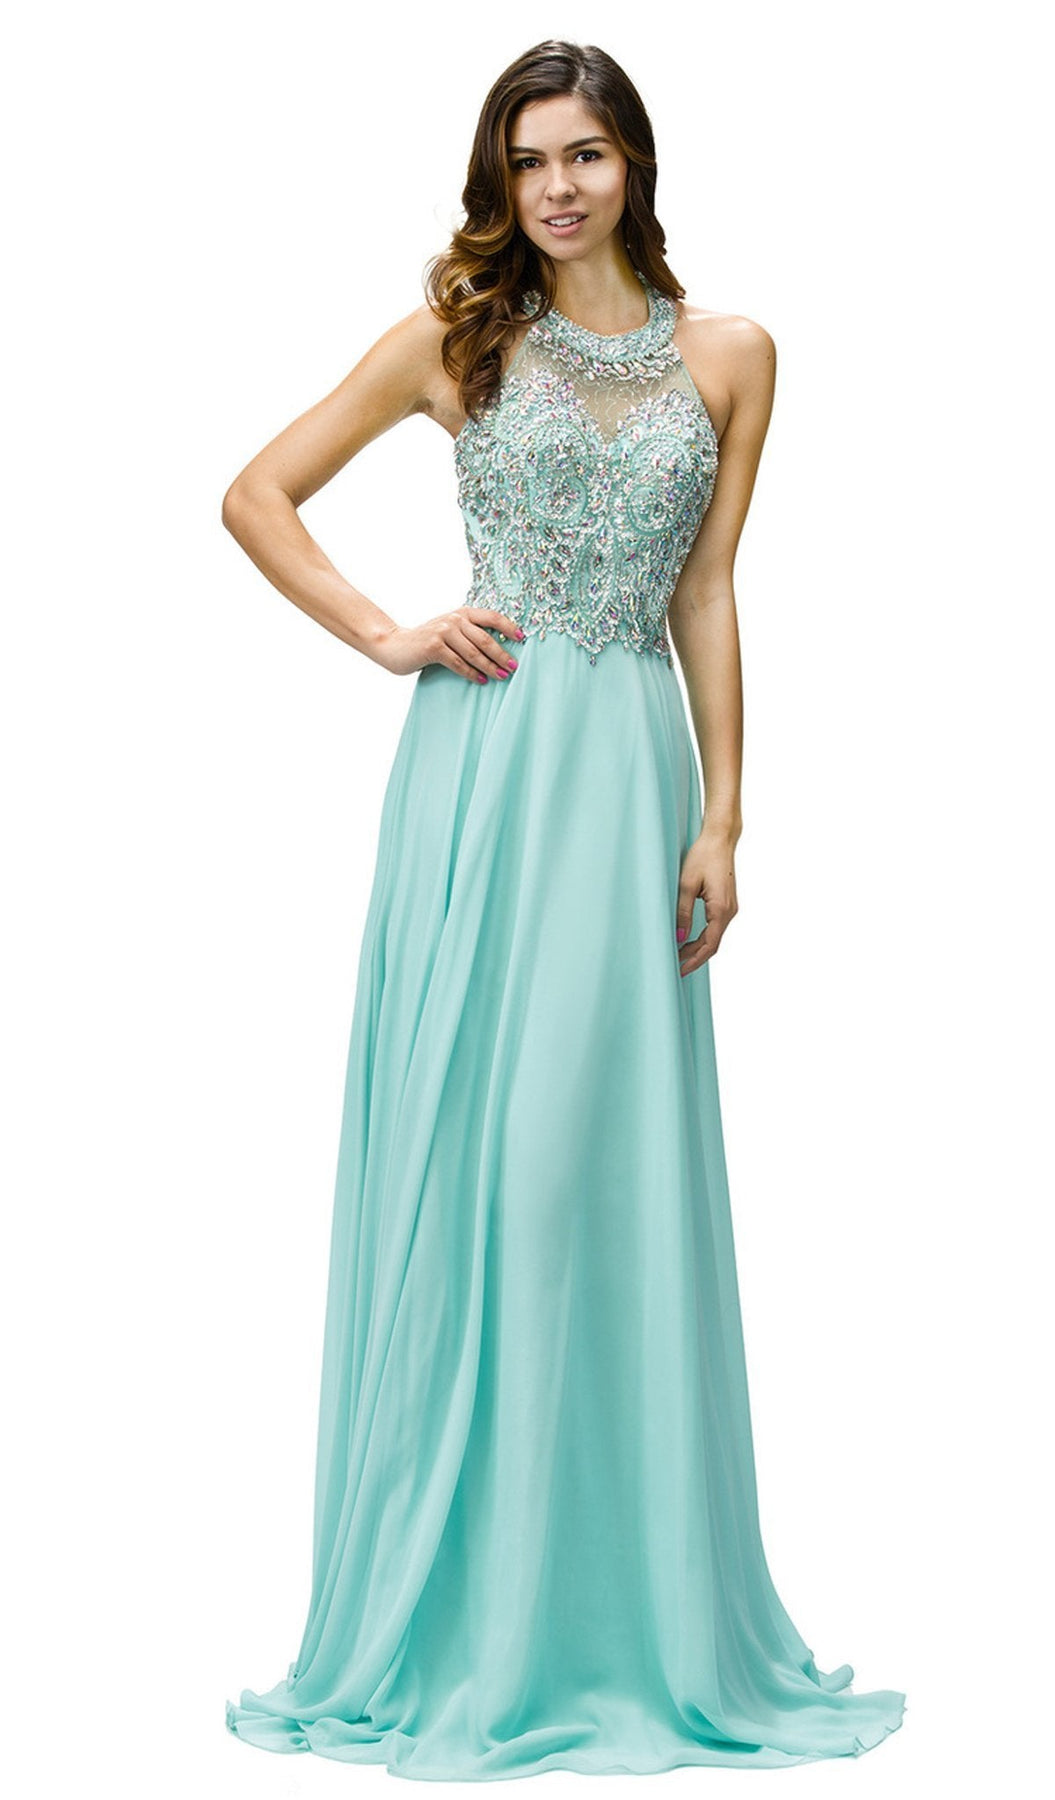 Dancing Queen - 9233 Jewel Adorned Illusion Chiffon Prom Dress Special Occasion Dress